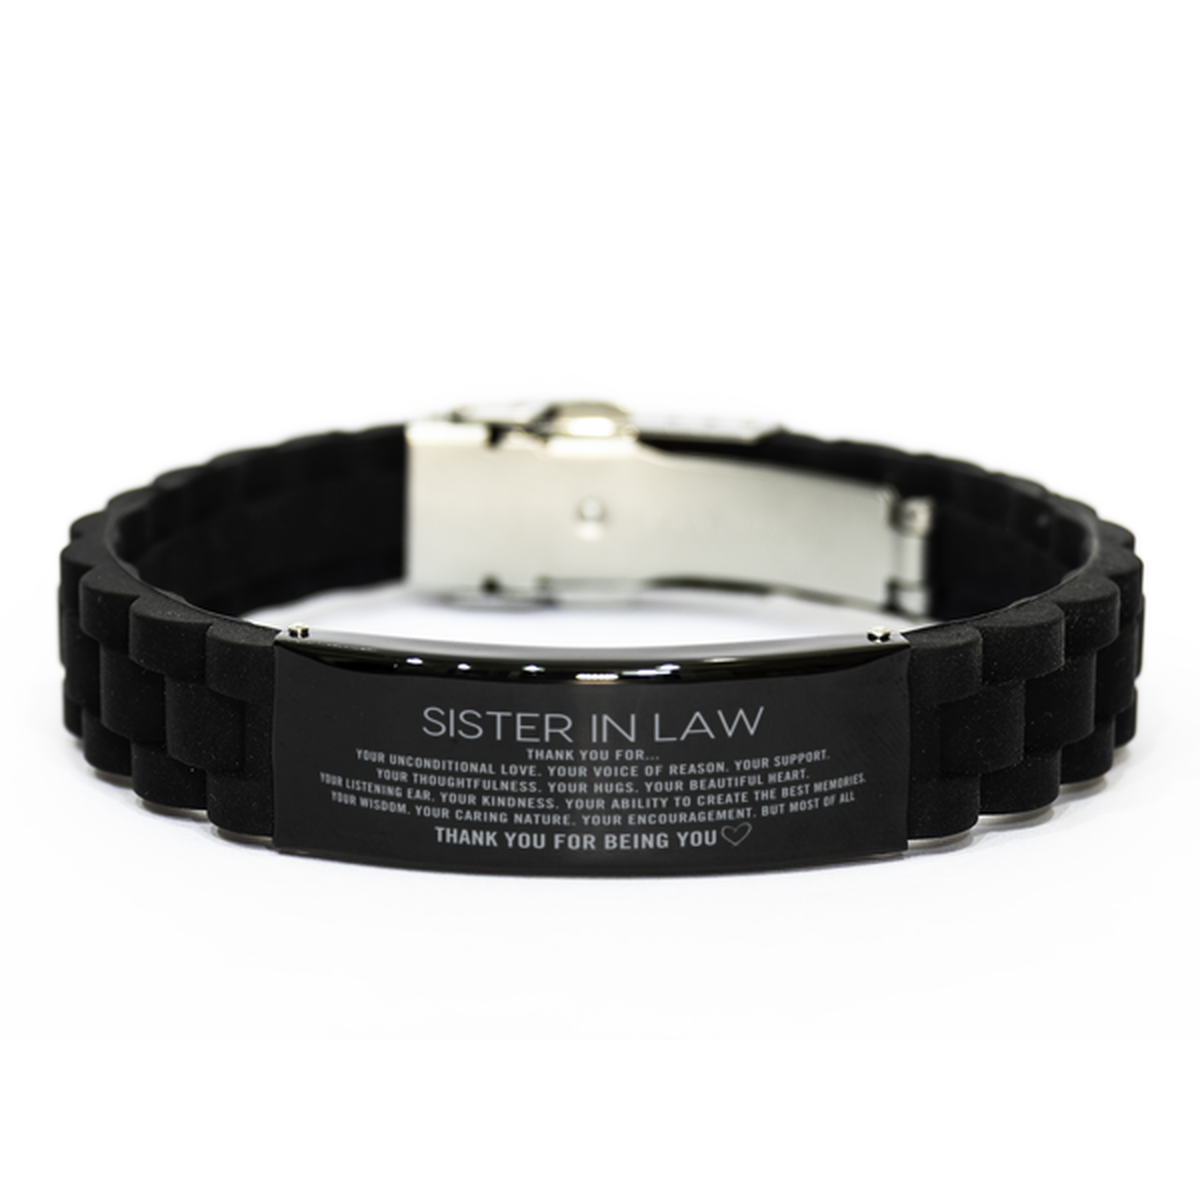 Sister In Law Black Glidelock Clasp Bracelet Custom, Engraved Gifts For Sister In Law Christmas Graduation Birthday Gifts for Men Women Sister In Law Thank you for Your unconditional love